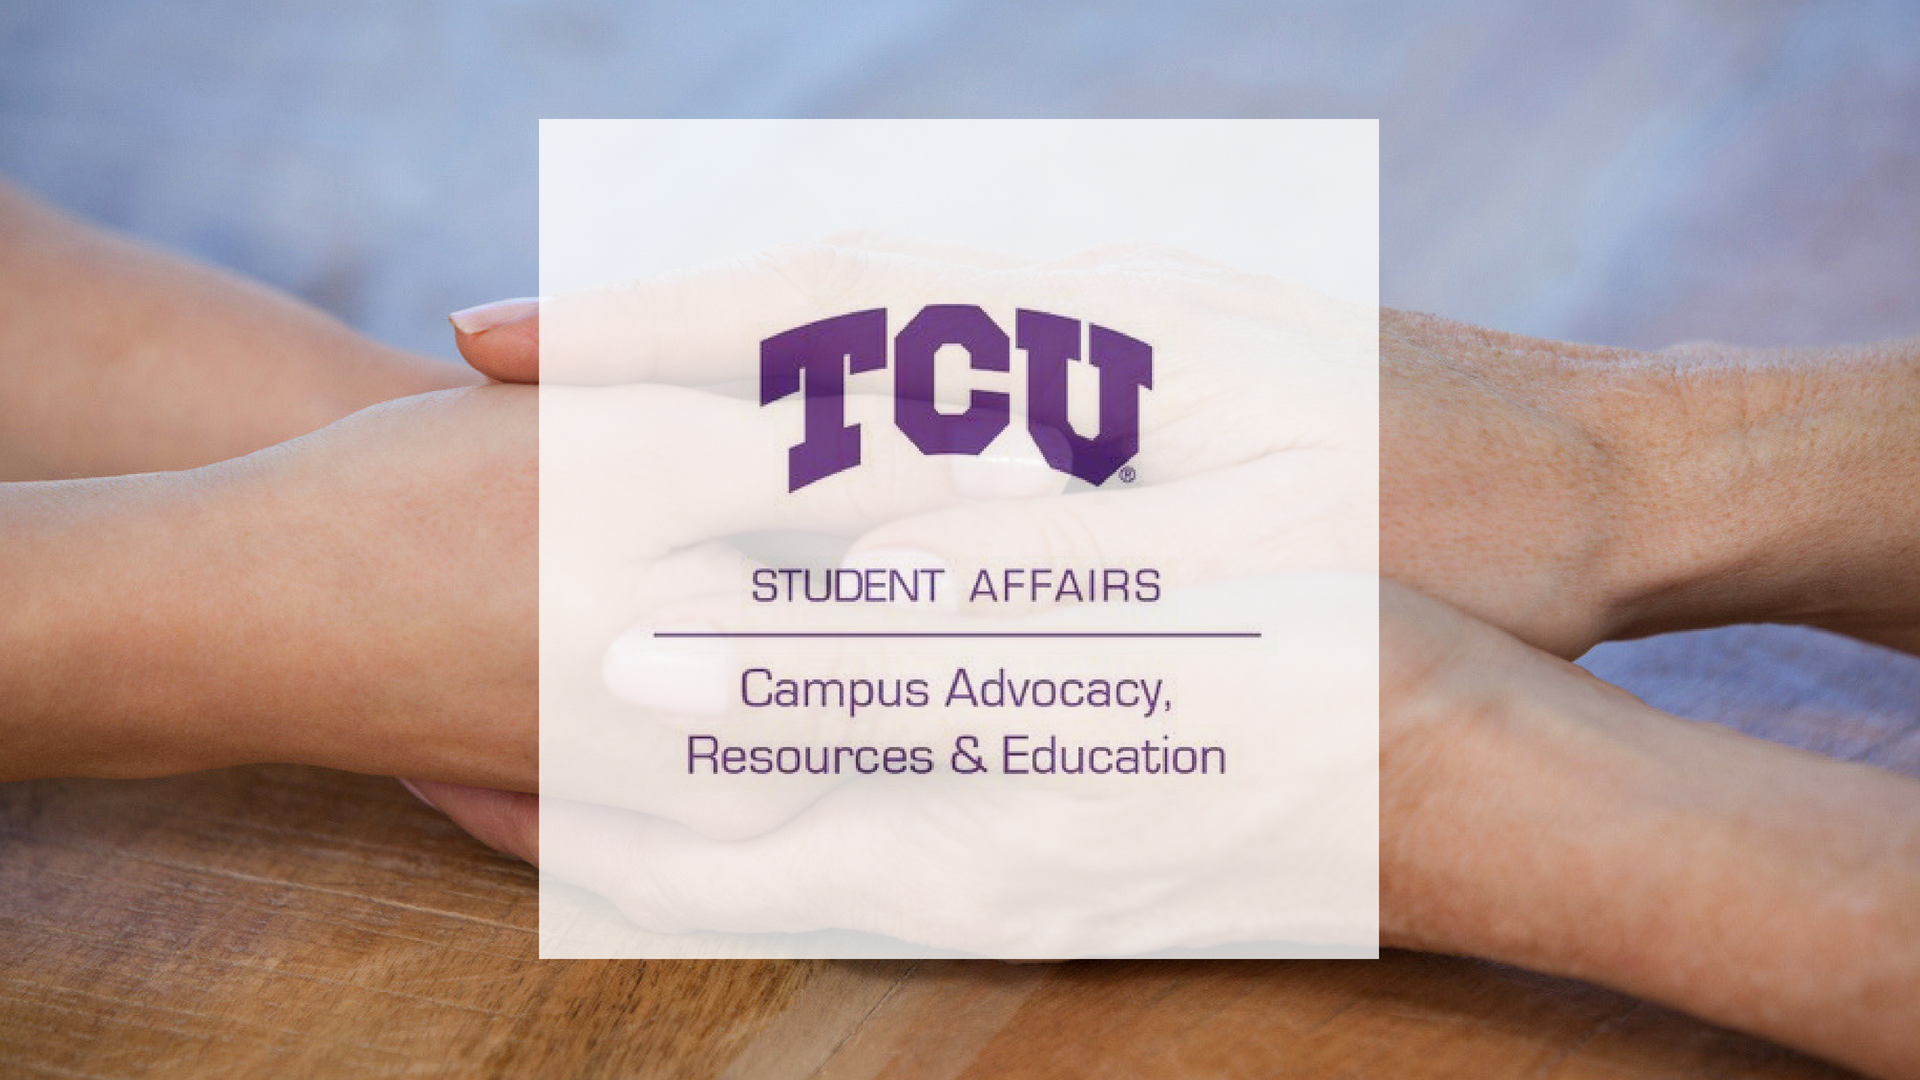 Tcu Fights Back Against Sexual Assault With Care Tanglewood Moms 7522